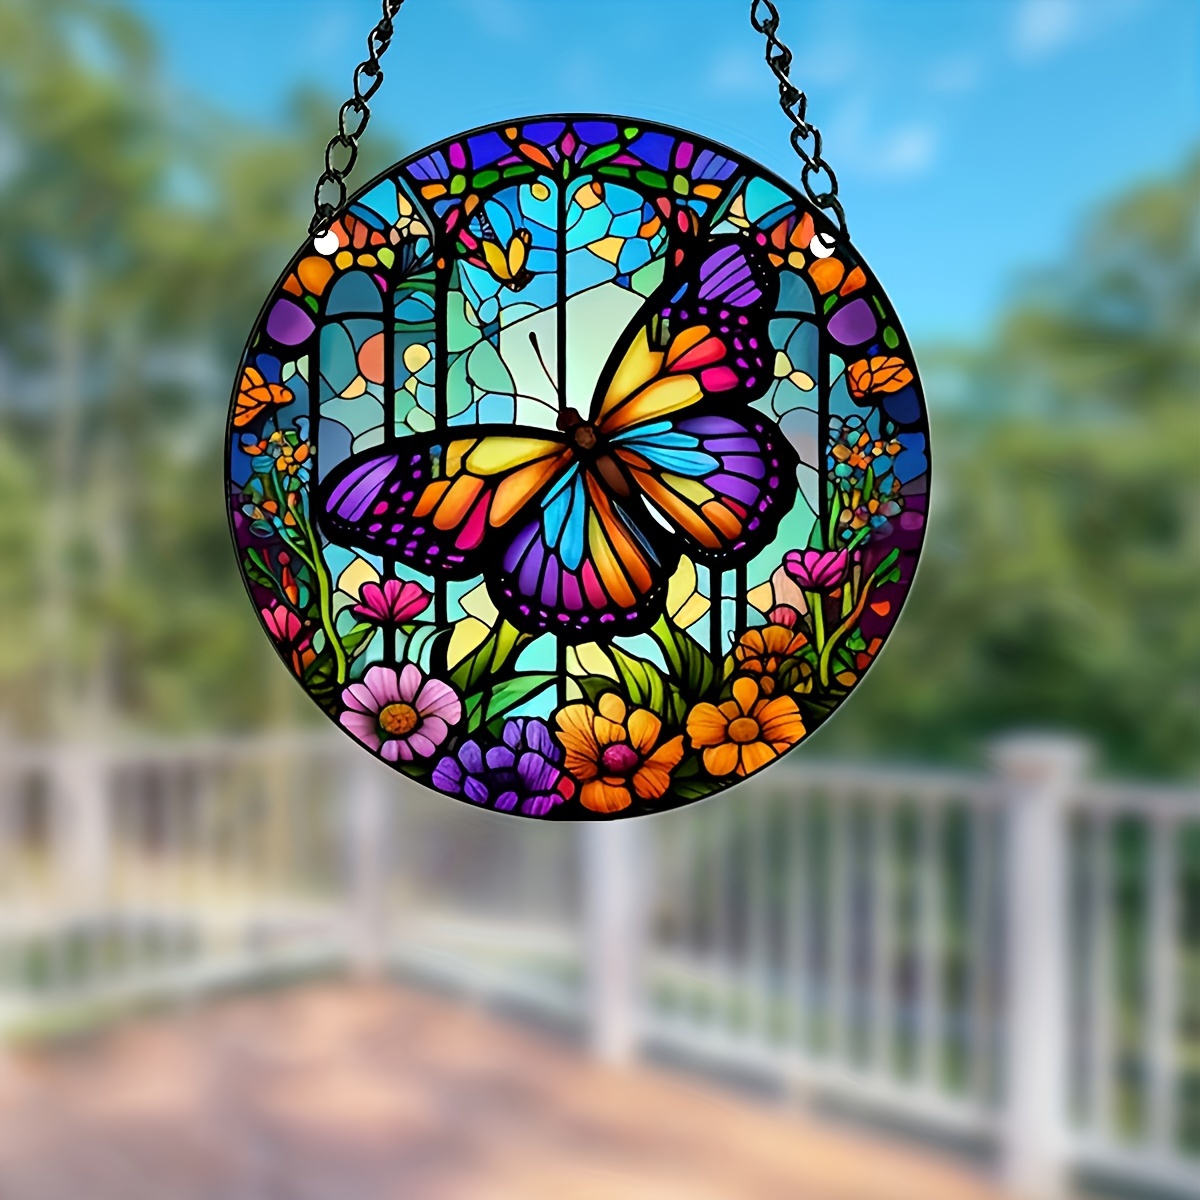 

Butterfly Suncatcher Wall Panel - Plastic Light Catcher For Halloween, Living Room, Balcony, Patio, Porch, Autumn Decor, Housewarming Gift - Wedding Material With Unique Theme Design